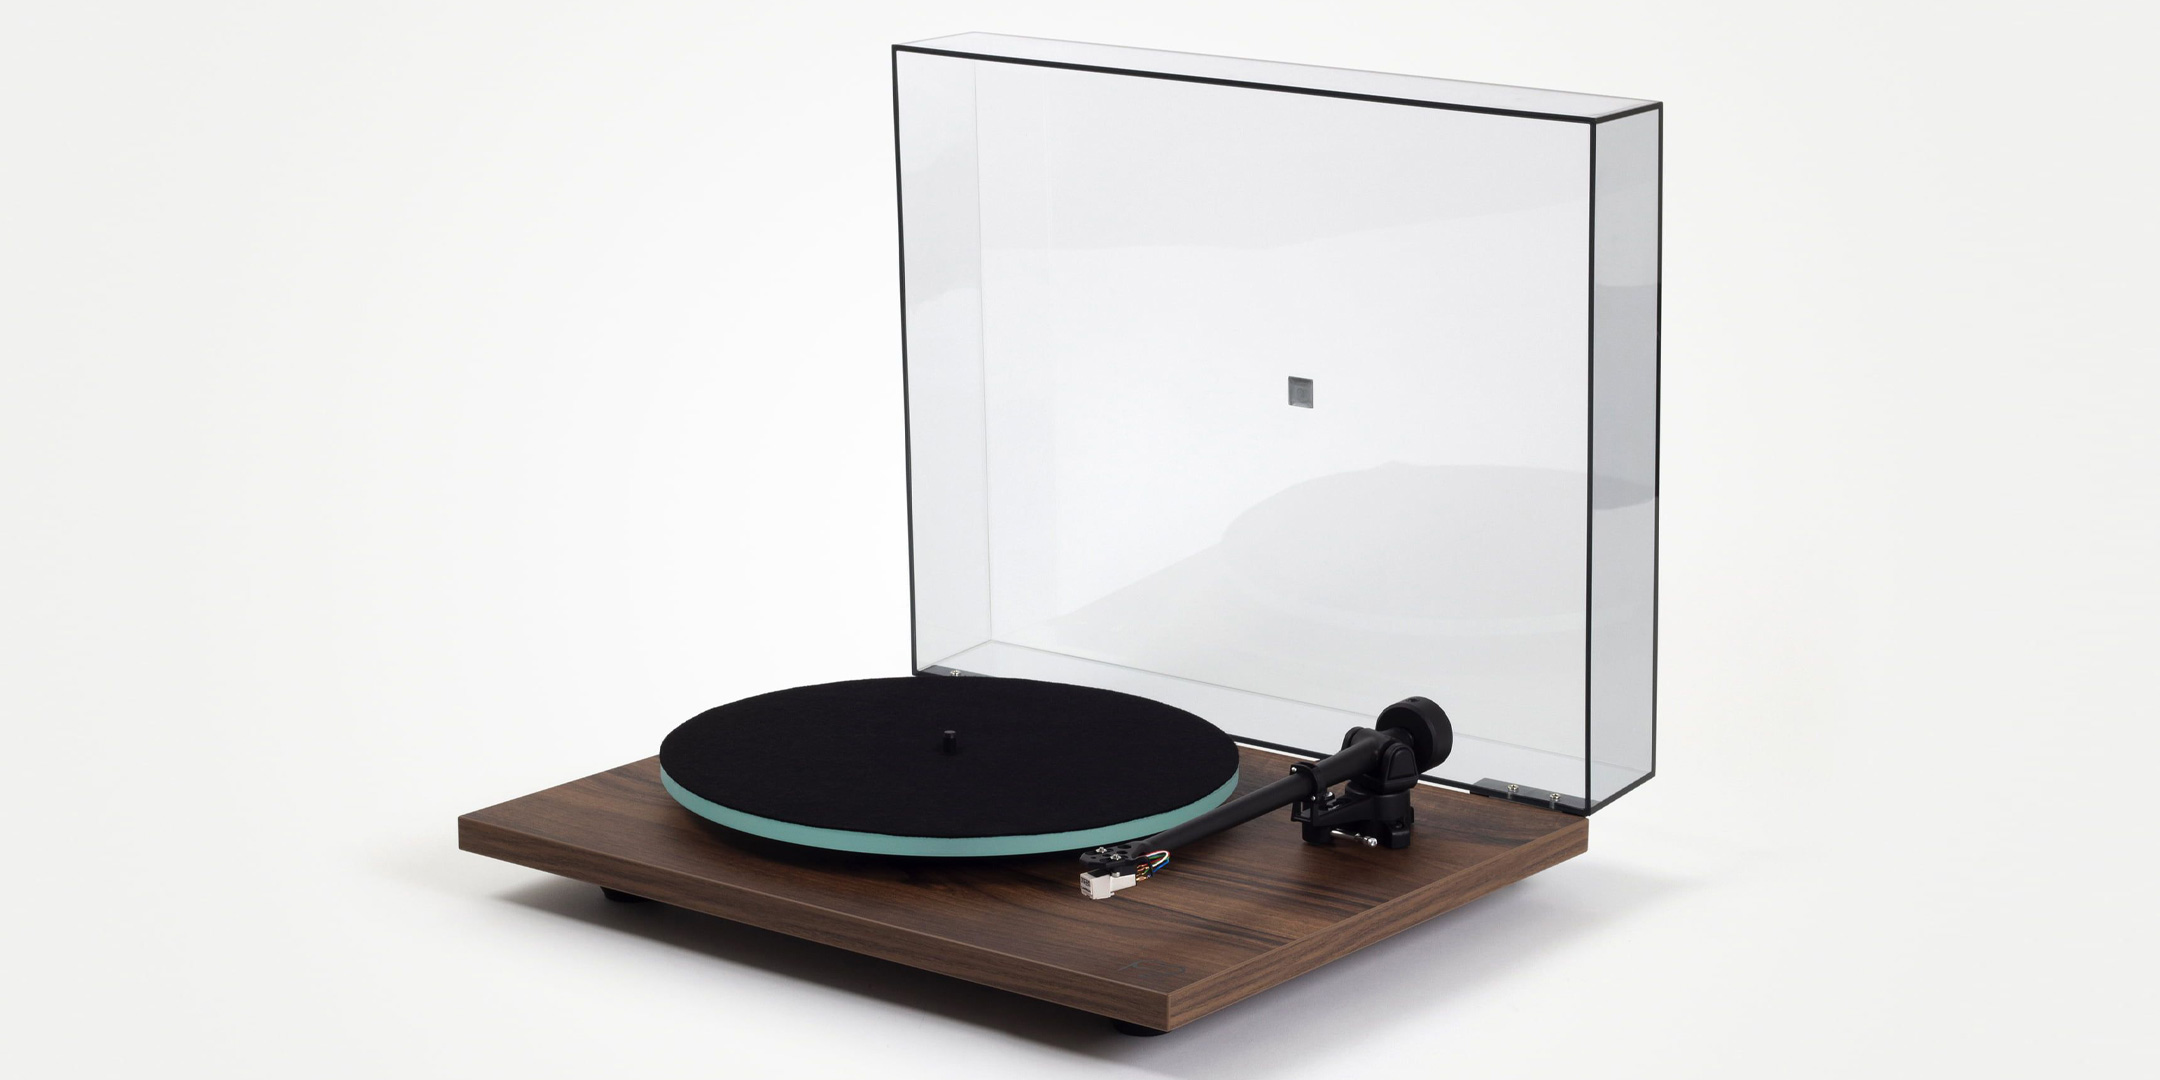 Pic showing a Walnut Rega Planar 2 Turntable from an angle with the lid raised on a white background